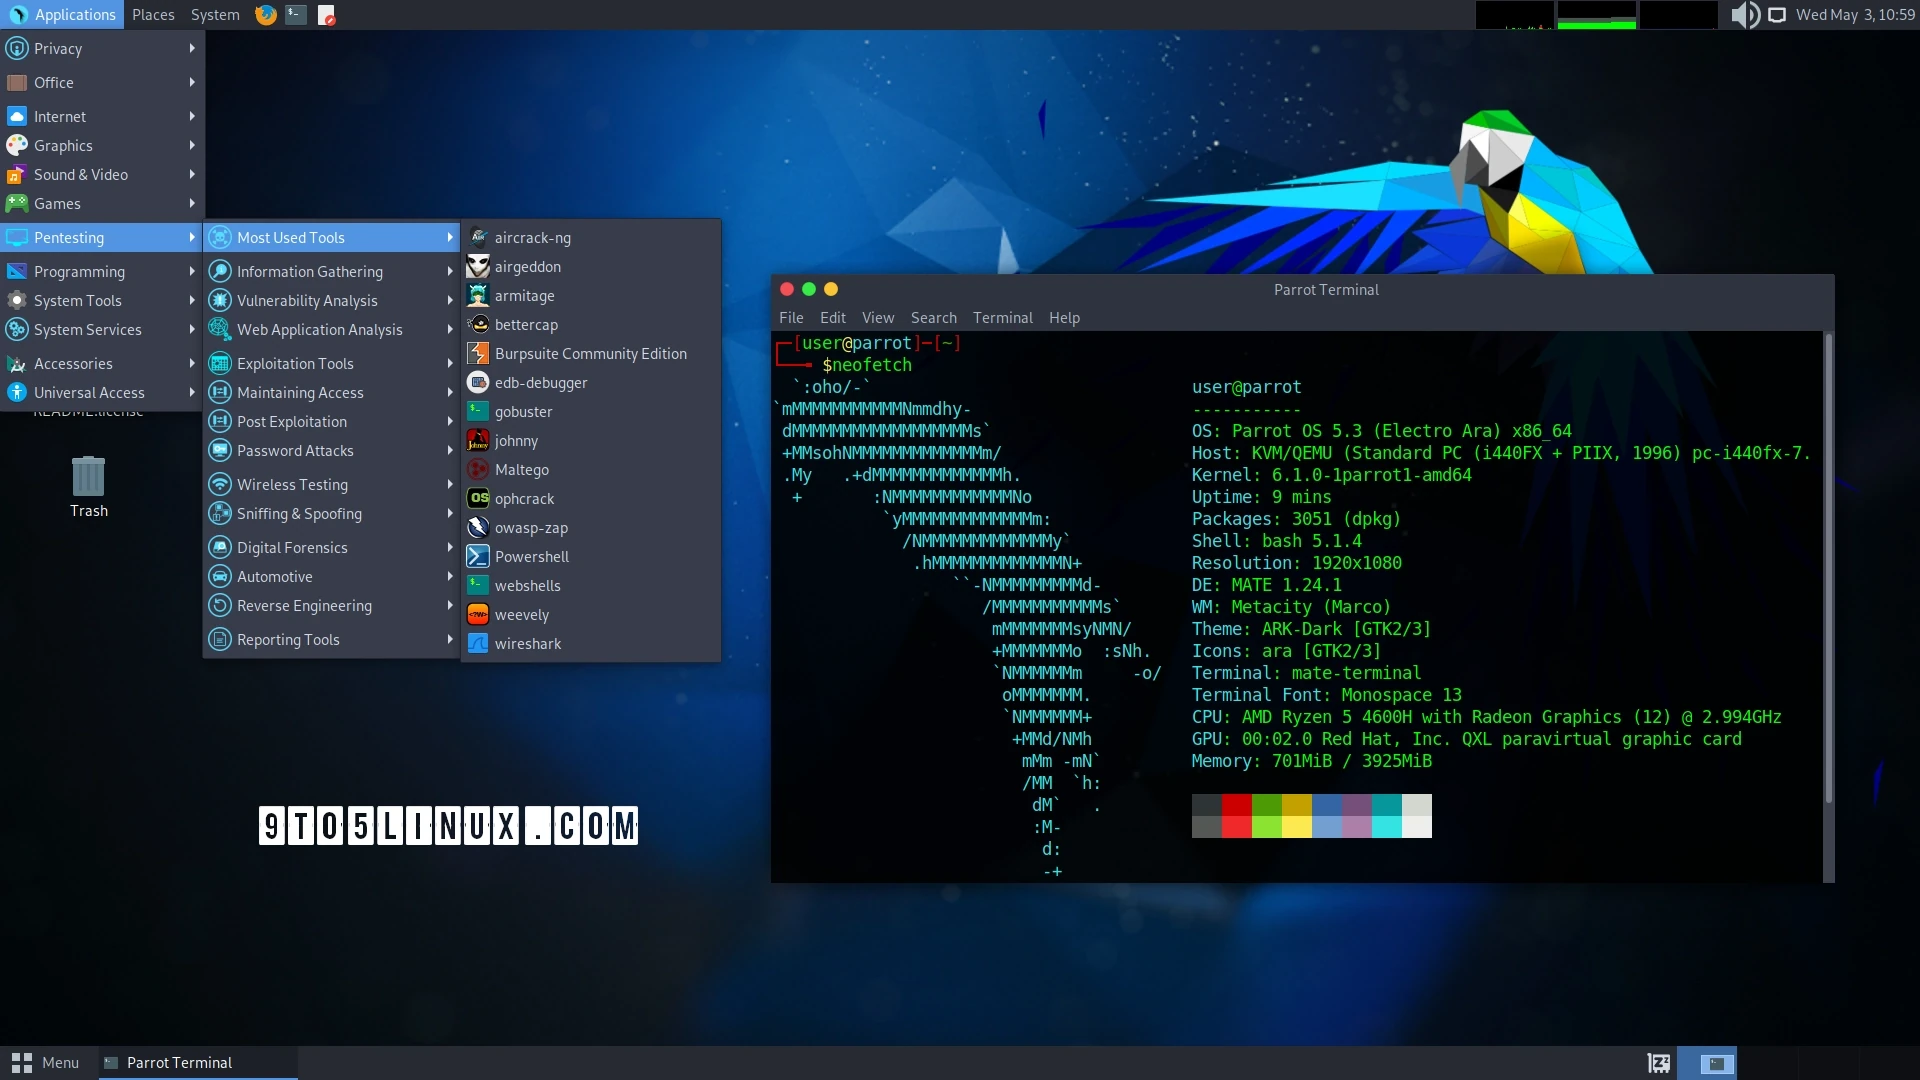 Parrot OS 5.3 Ethical Hacking Distro Is Here with Linux Kernel 6.1 LTS